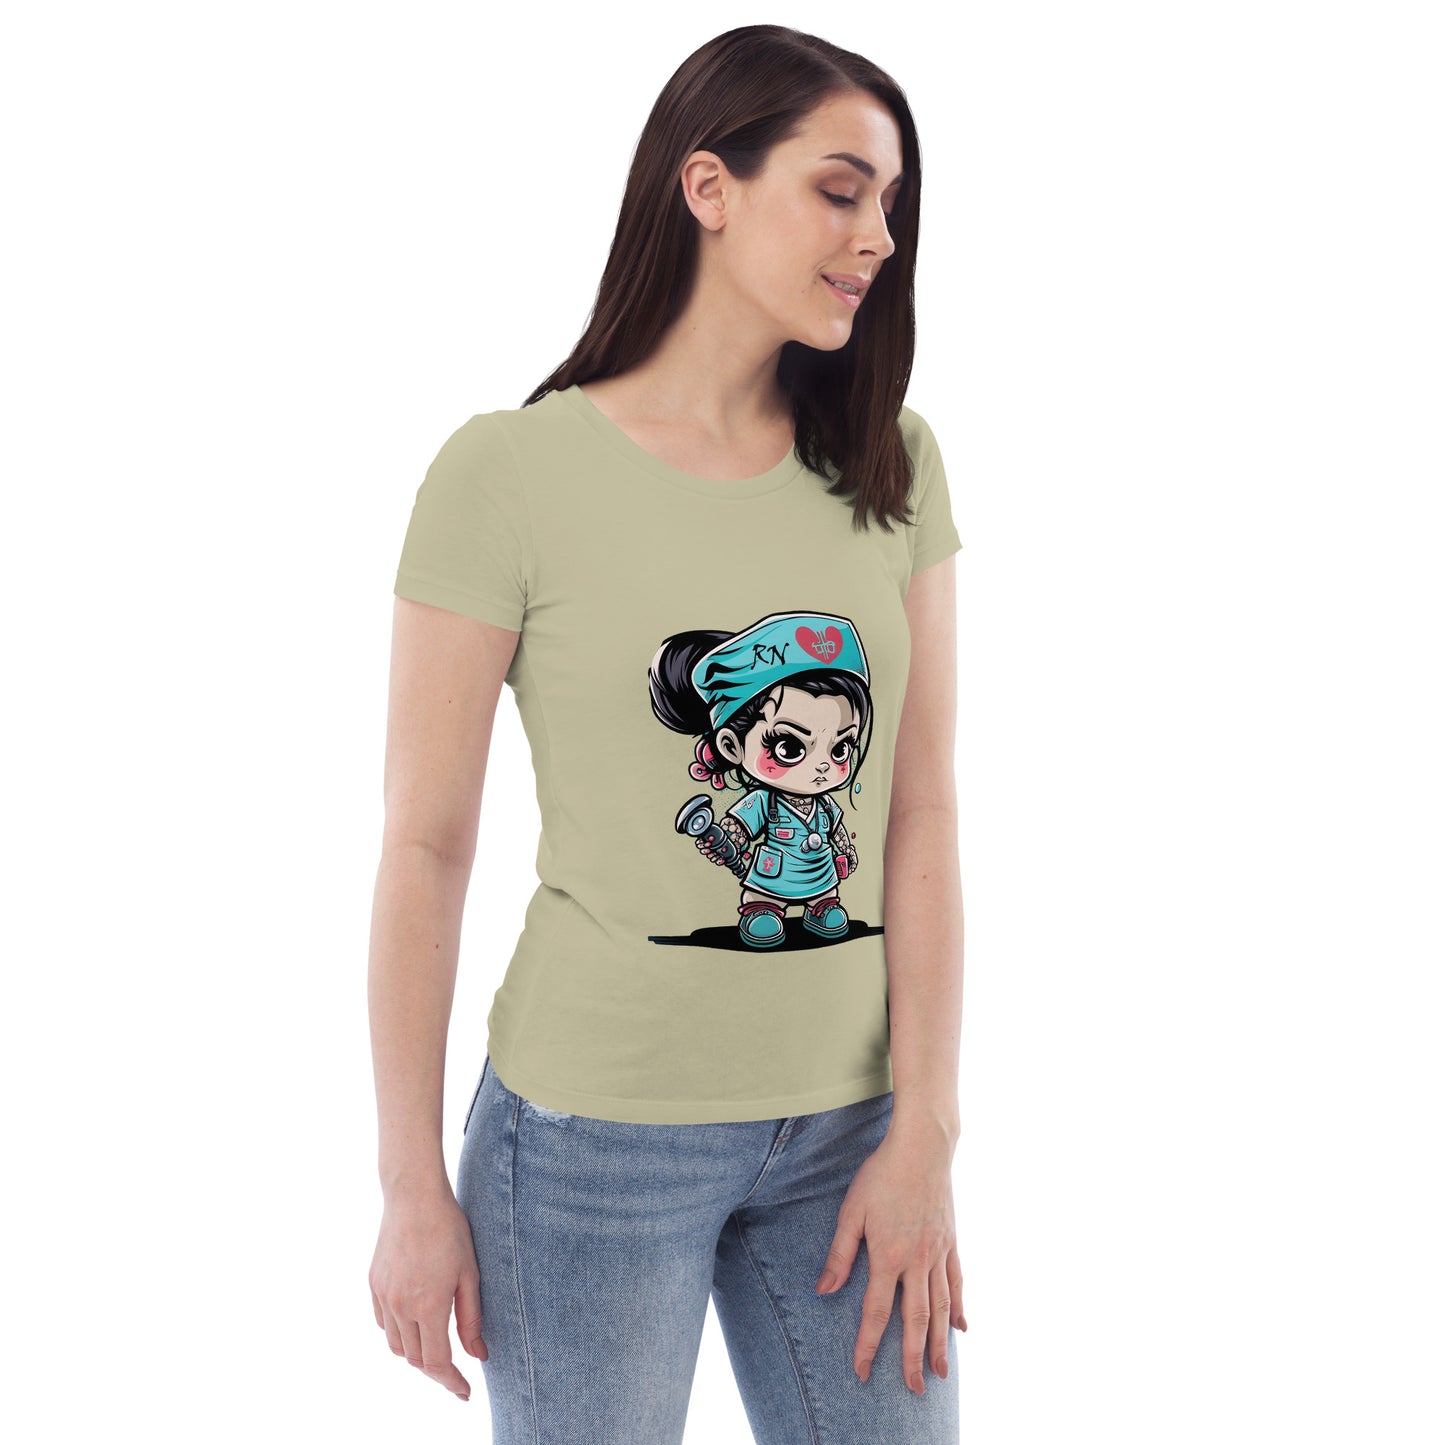 Tiny Healer Women's fitted eco tee